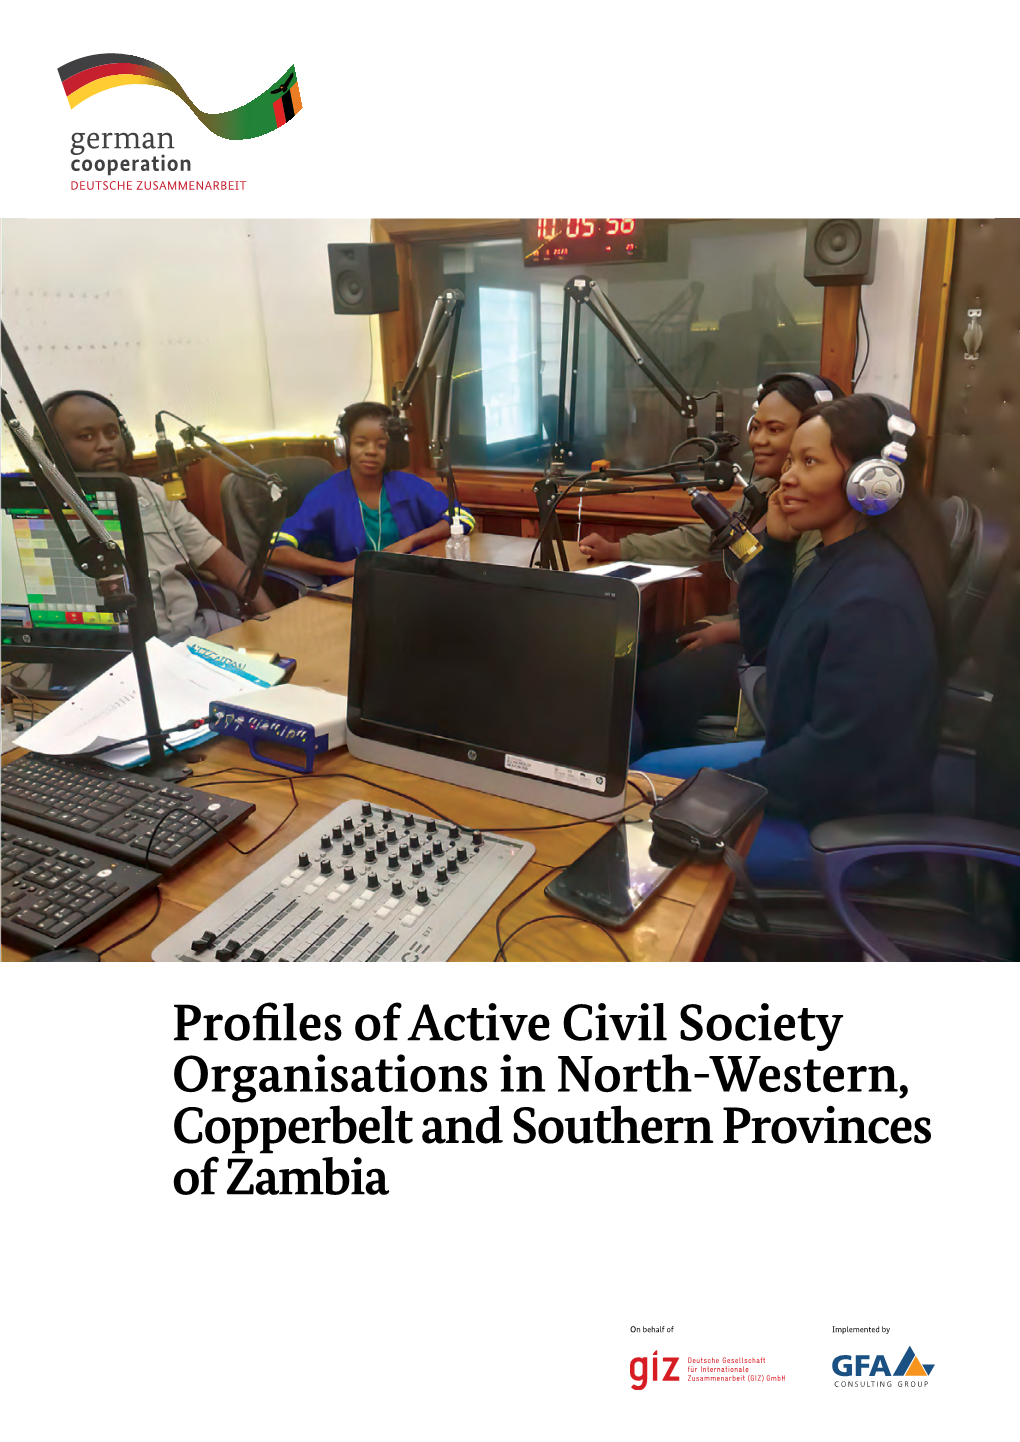 Profiles of Active Civil Society Organisations in North-Western, Copperbelt and Southern Provinces of Zambia